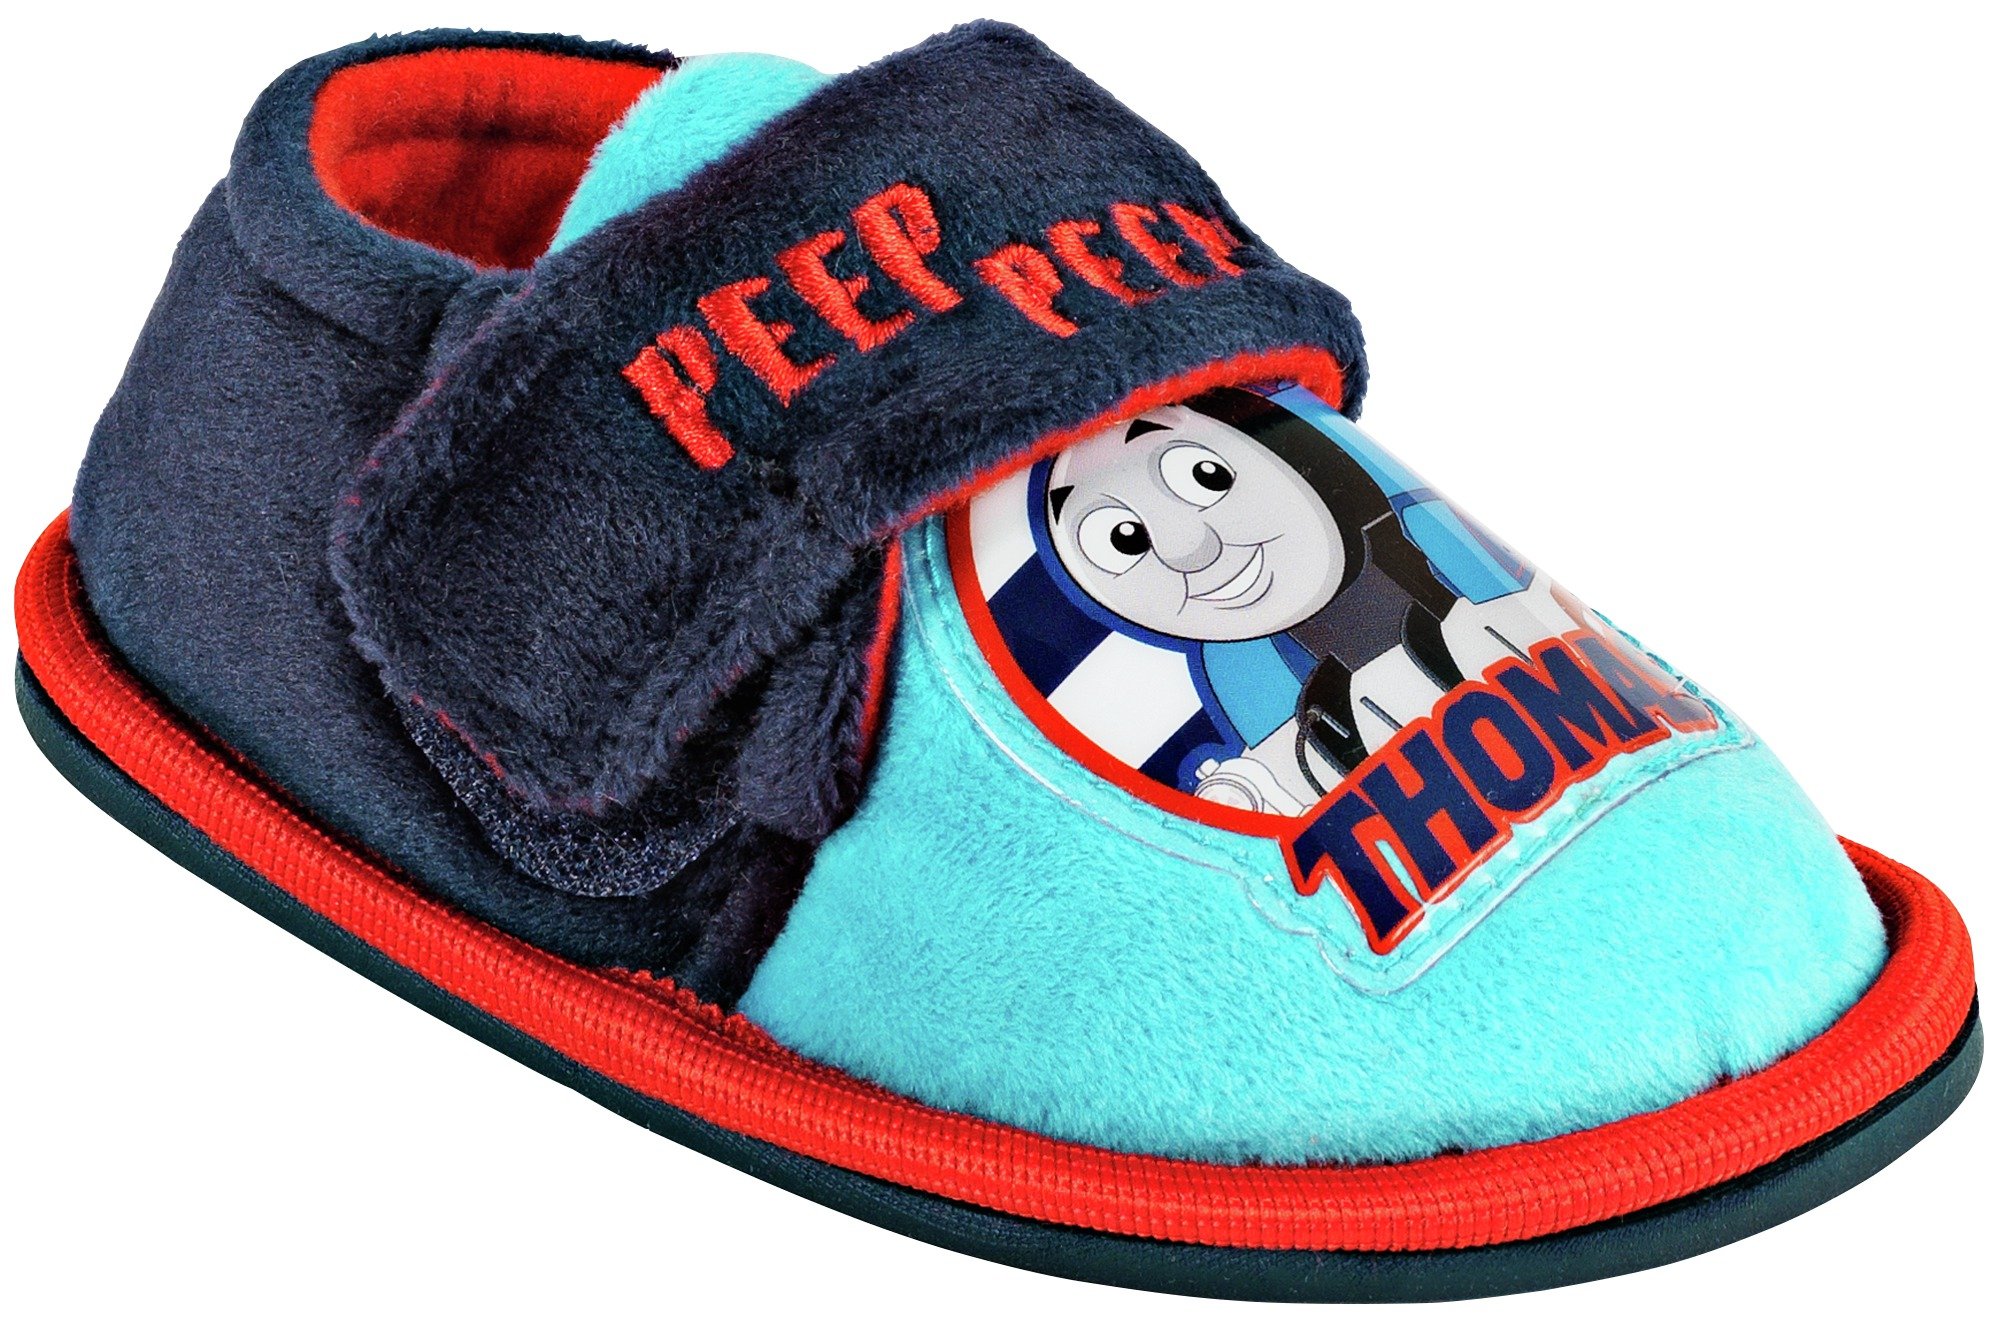 Thomas & Friends Toddle Slippers - Size 5.